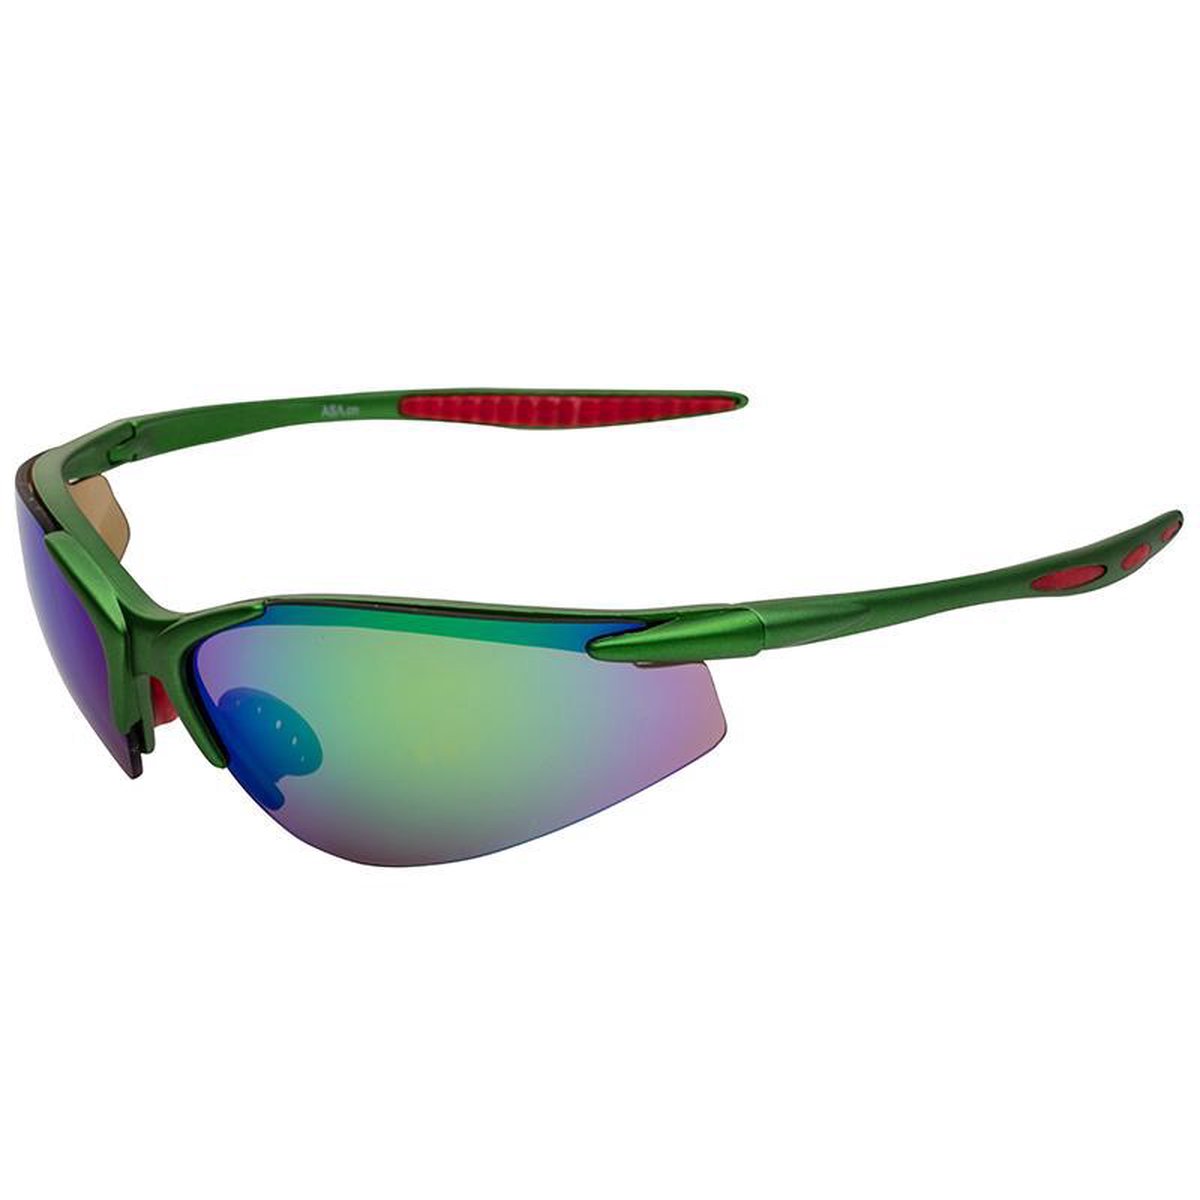 Apeirom Pollux TR-90 Ultra Light Groen Frame - TPE Extra Soft Rode Pootjes - UV400 - Polycarbonaat Multi-Color Anti Scratch Lens